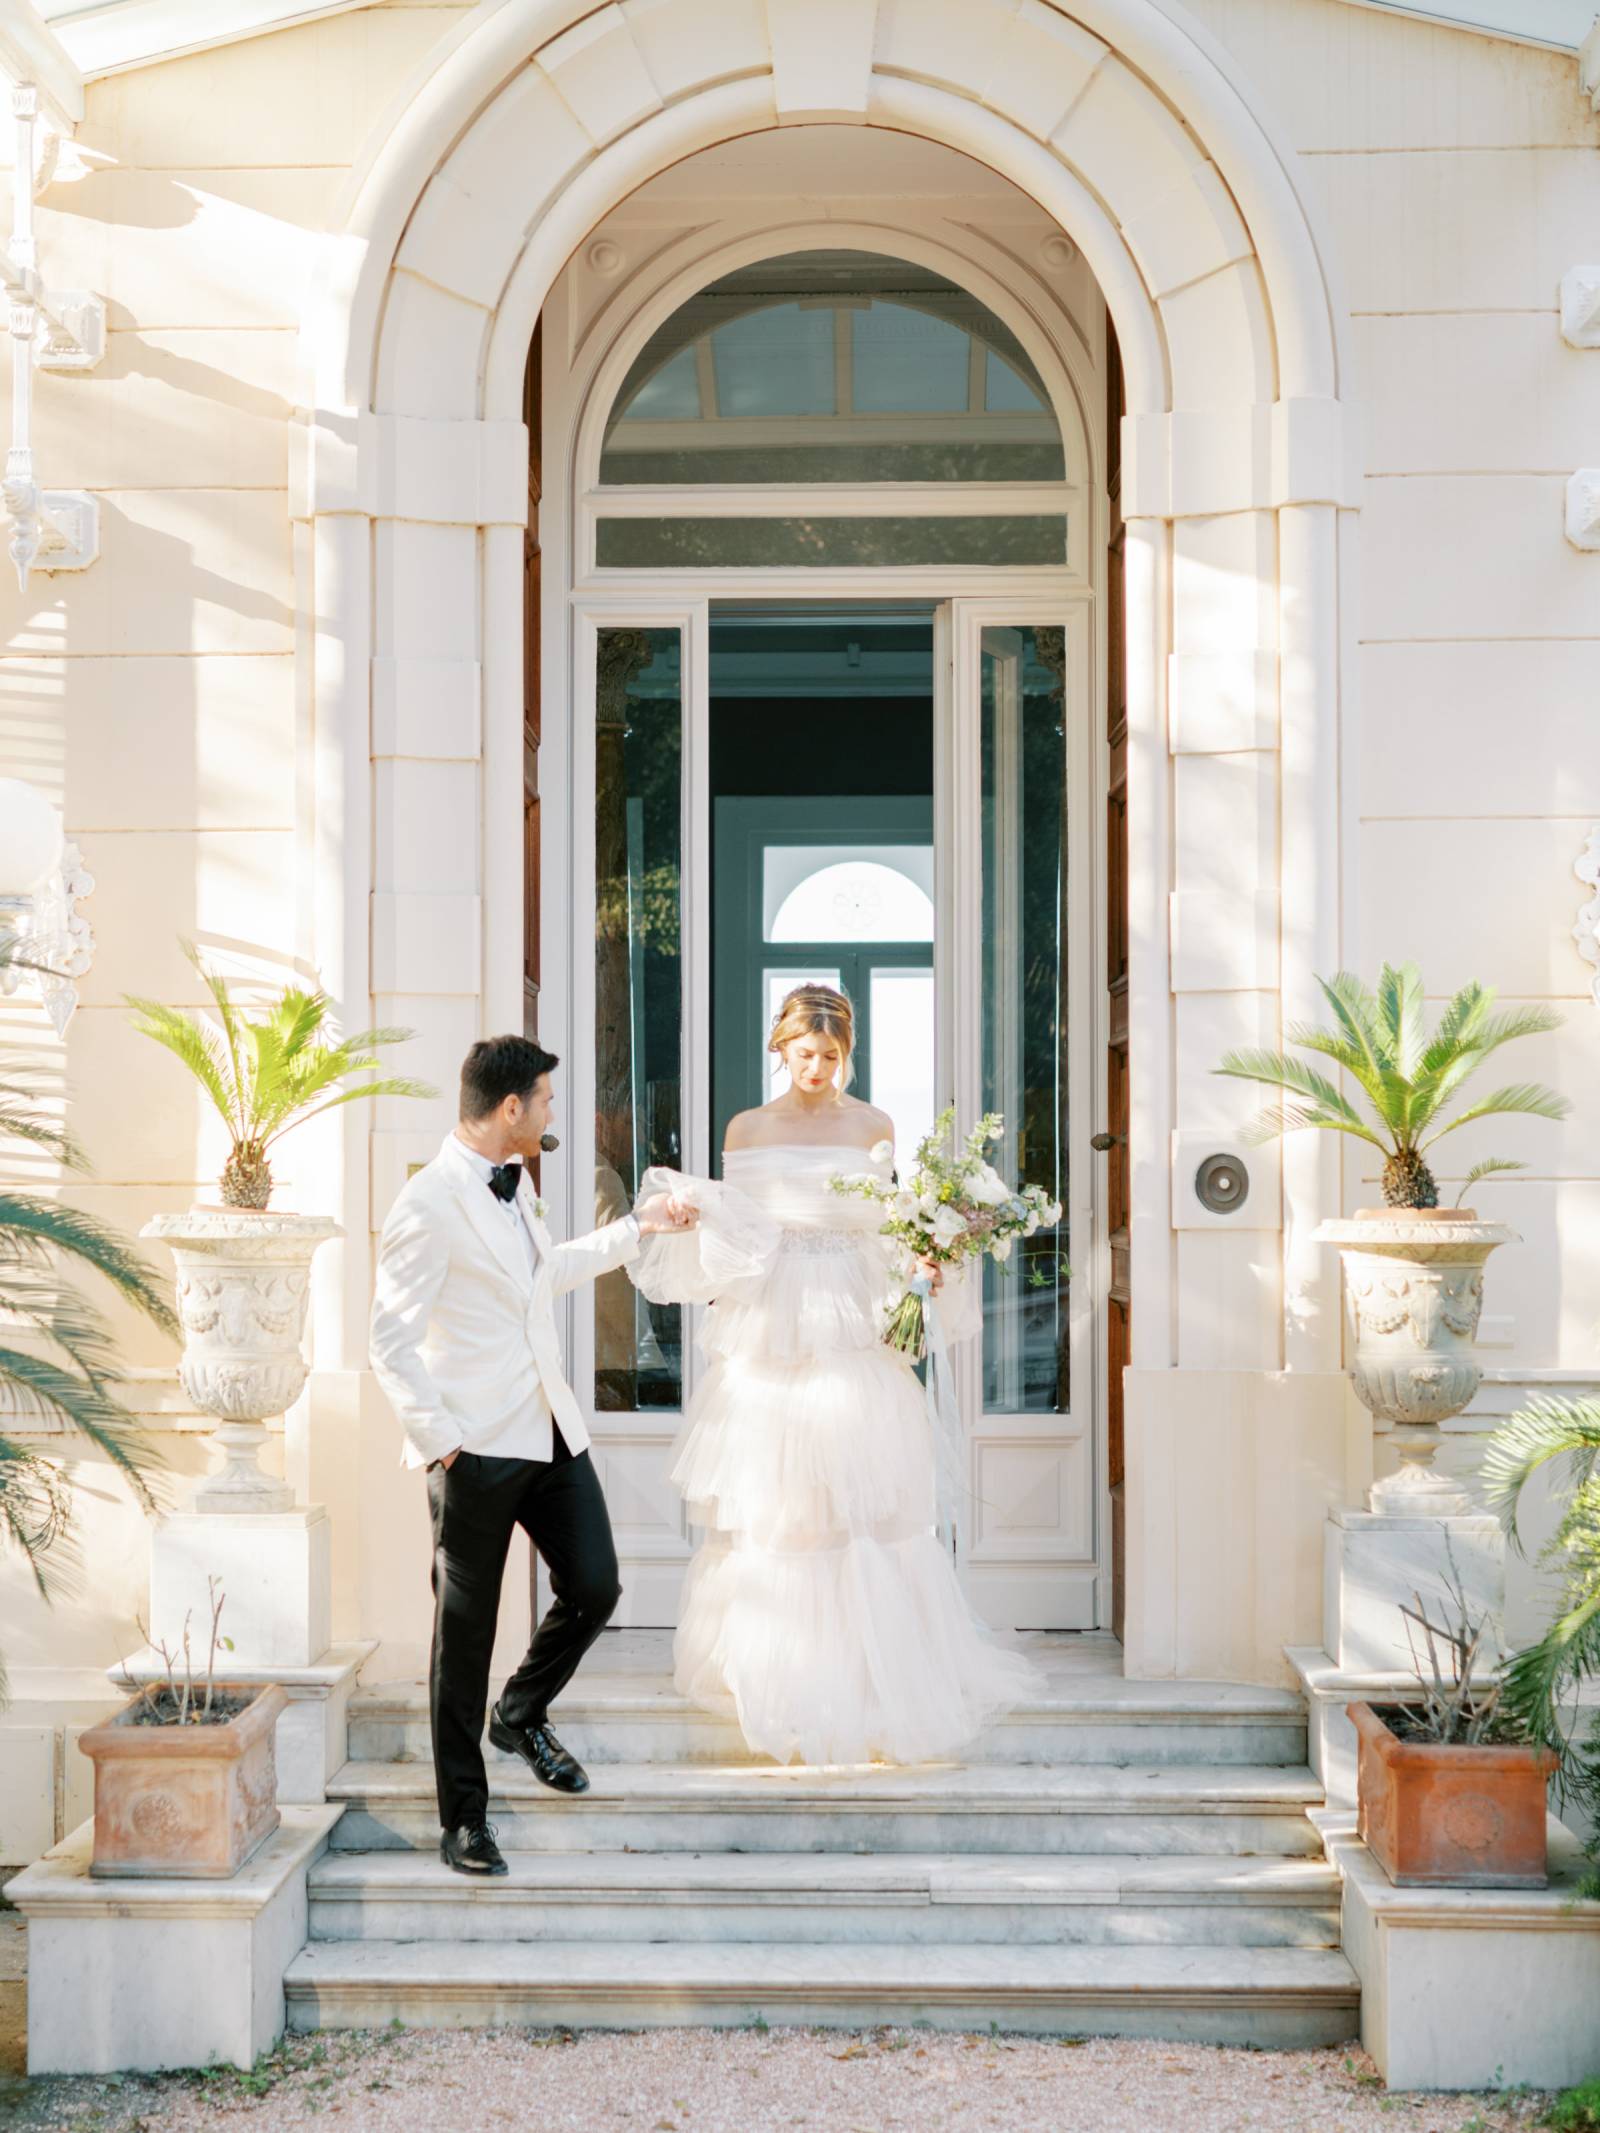 Charming wedding shoot in Sorrento inspired by 